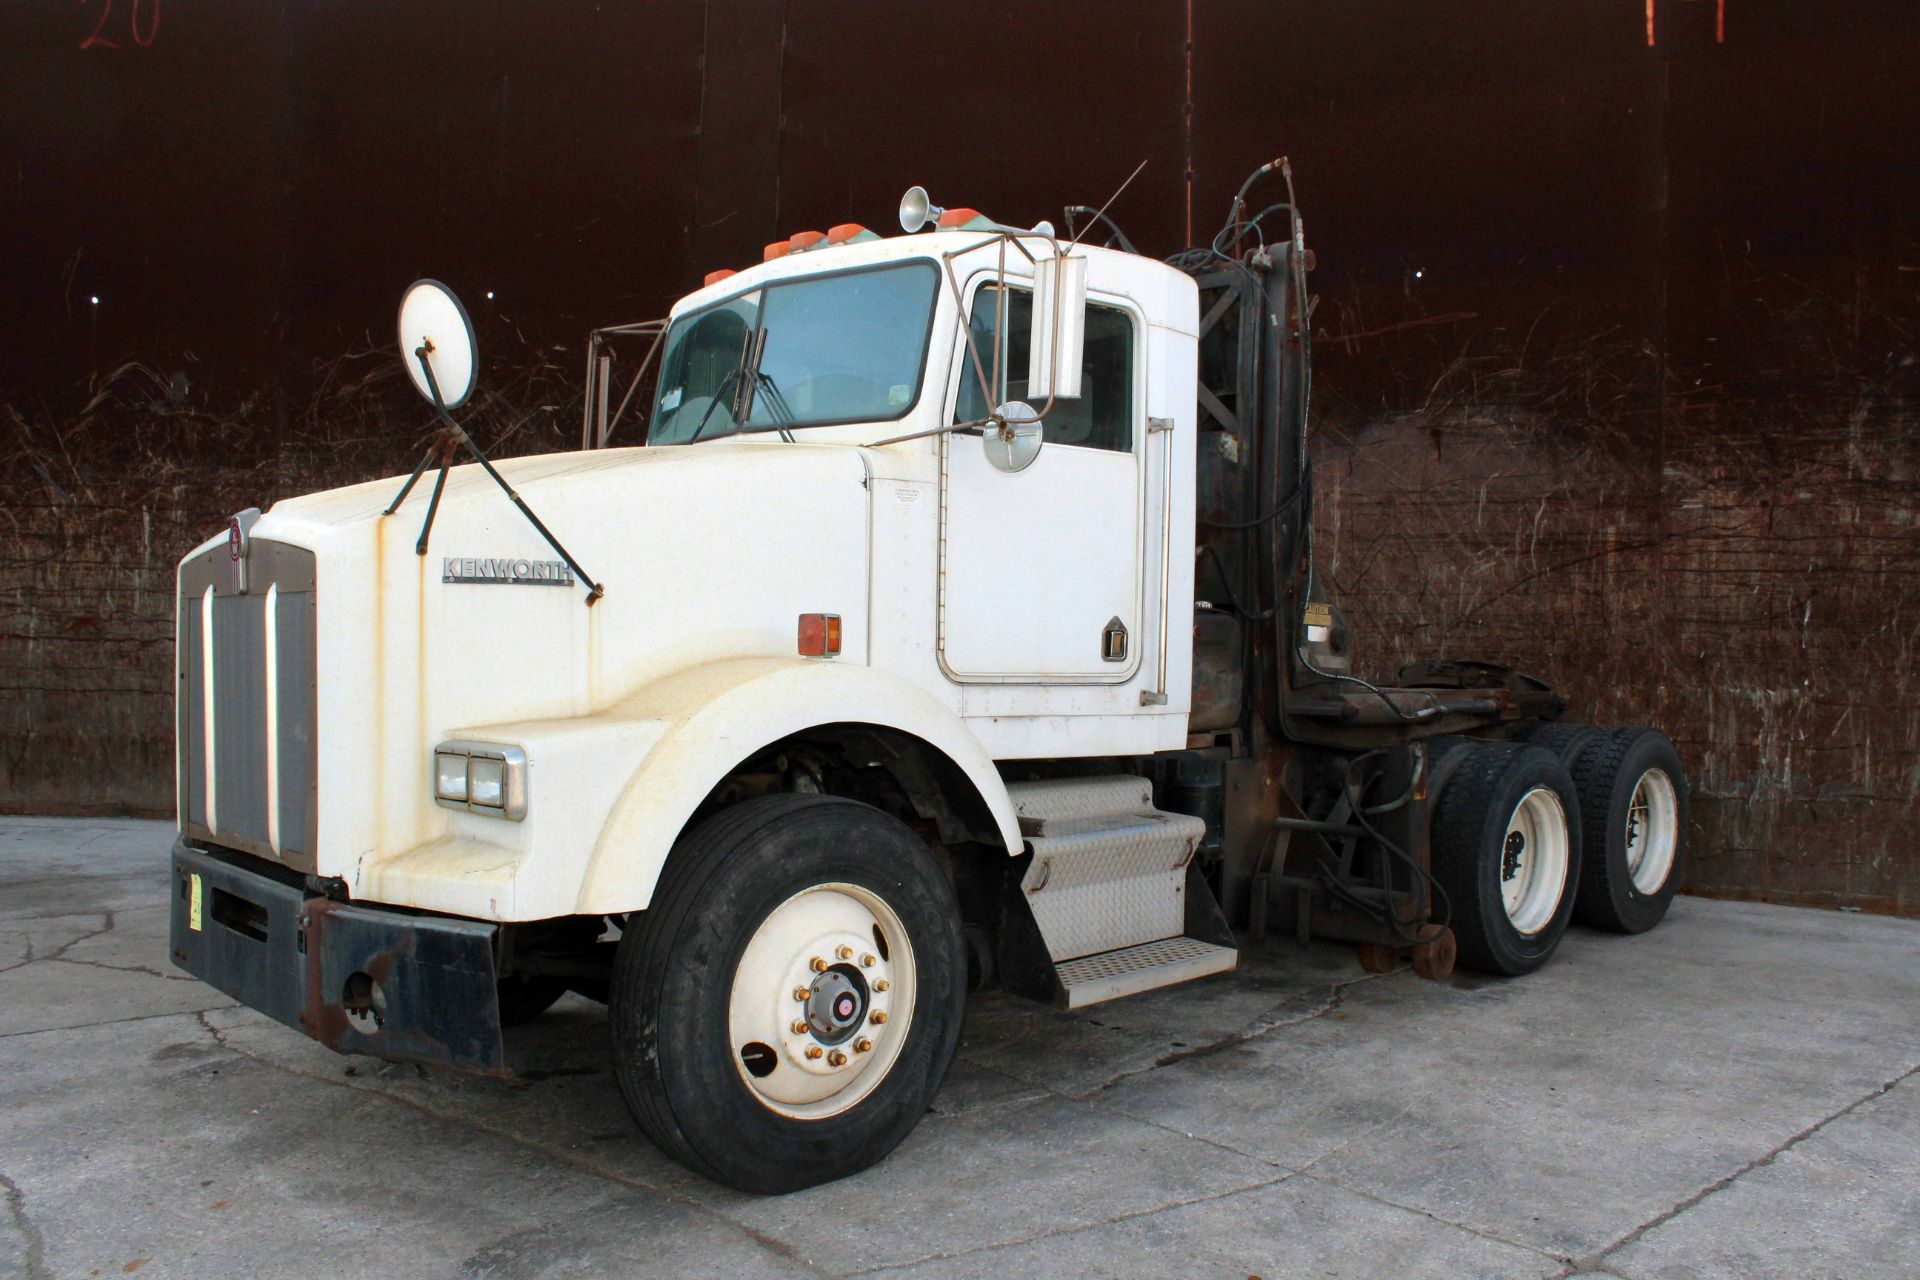 TILT LIFT TRACTOR, KENWORTH, new 1988, Odo: 740,000 miles, Chassis No. M515122